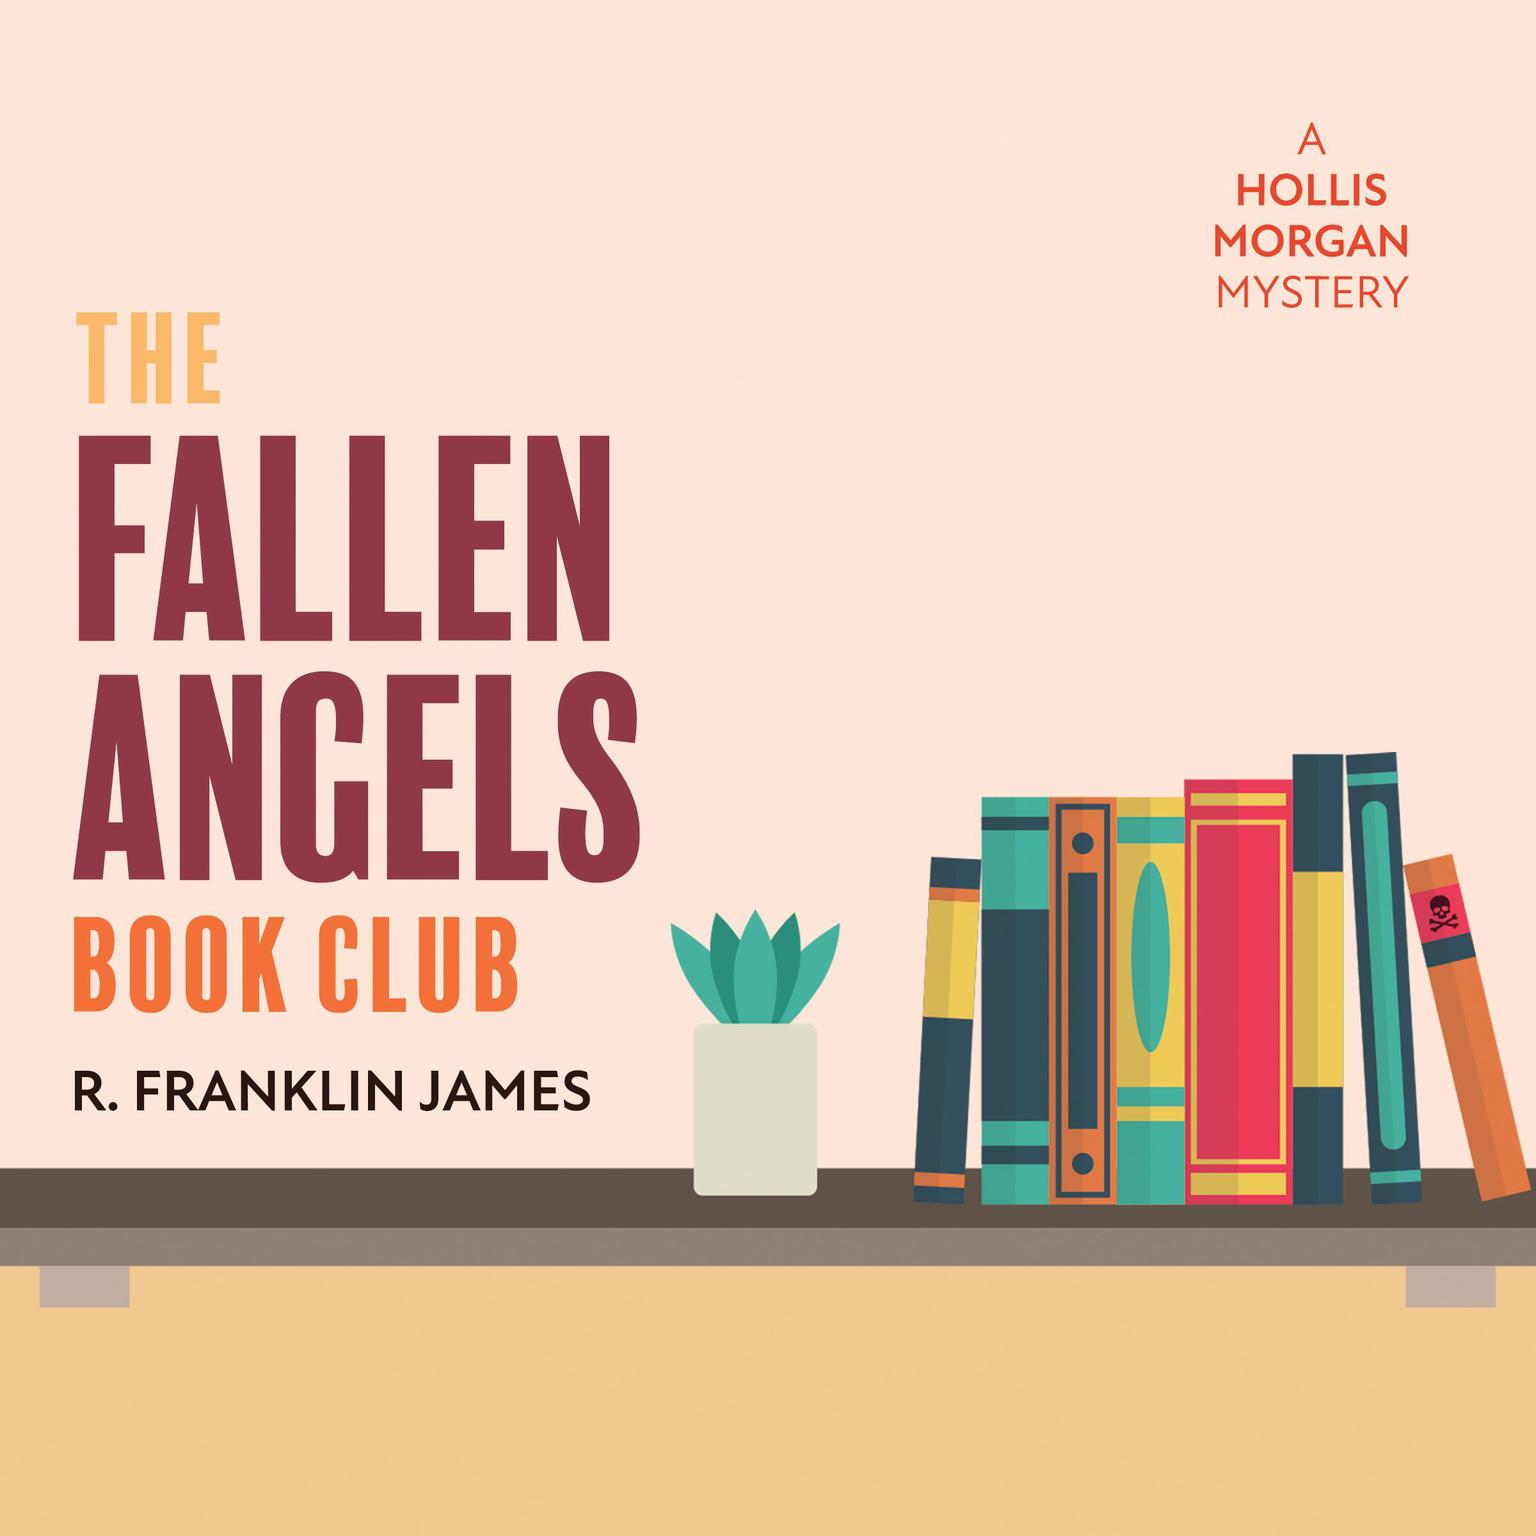 The Fallen Angels Book Club: A Hollis Morgan Mystery Audiobook, by R. Franklin James